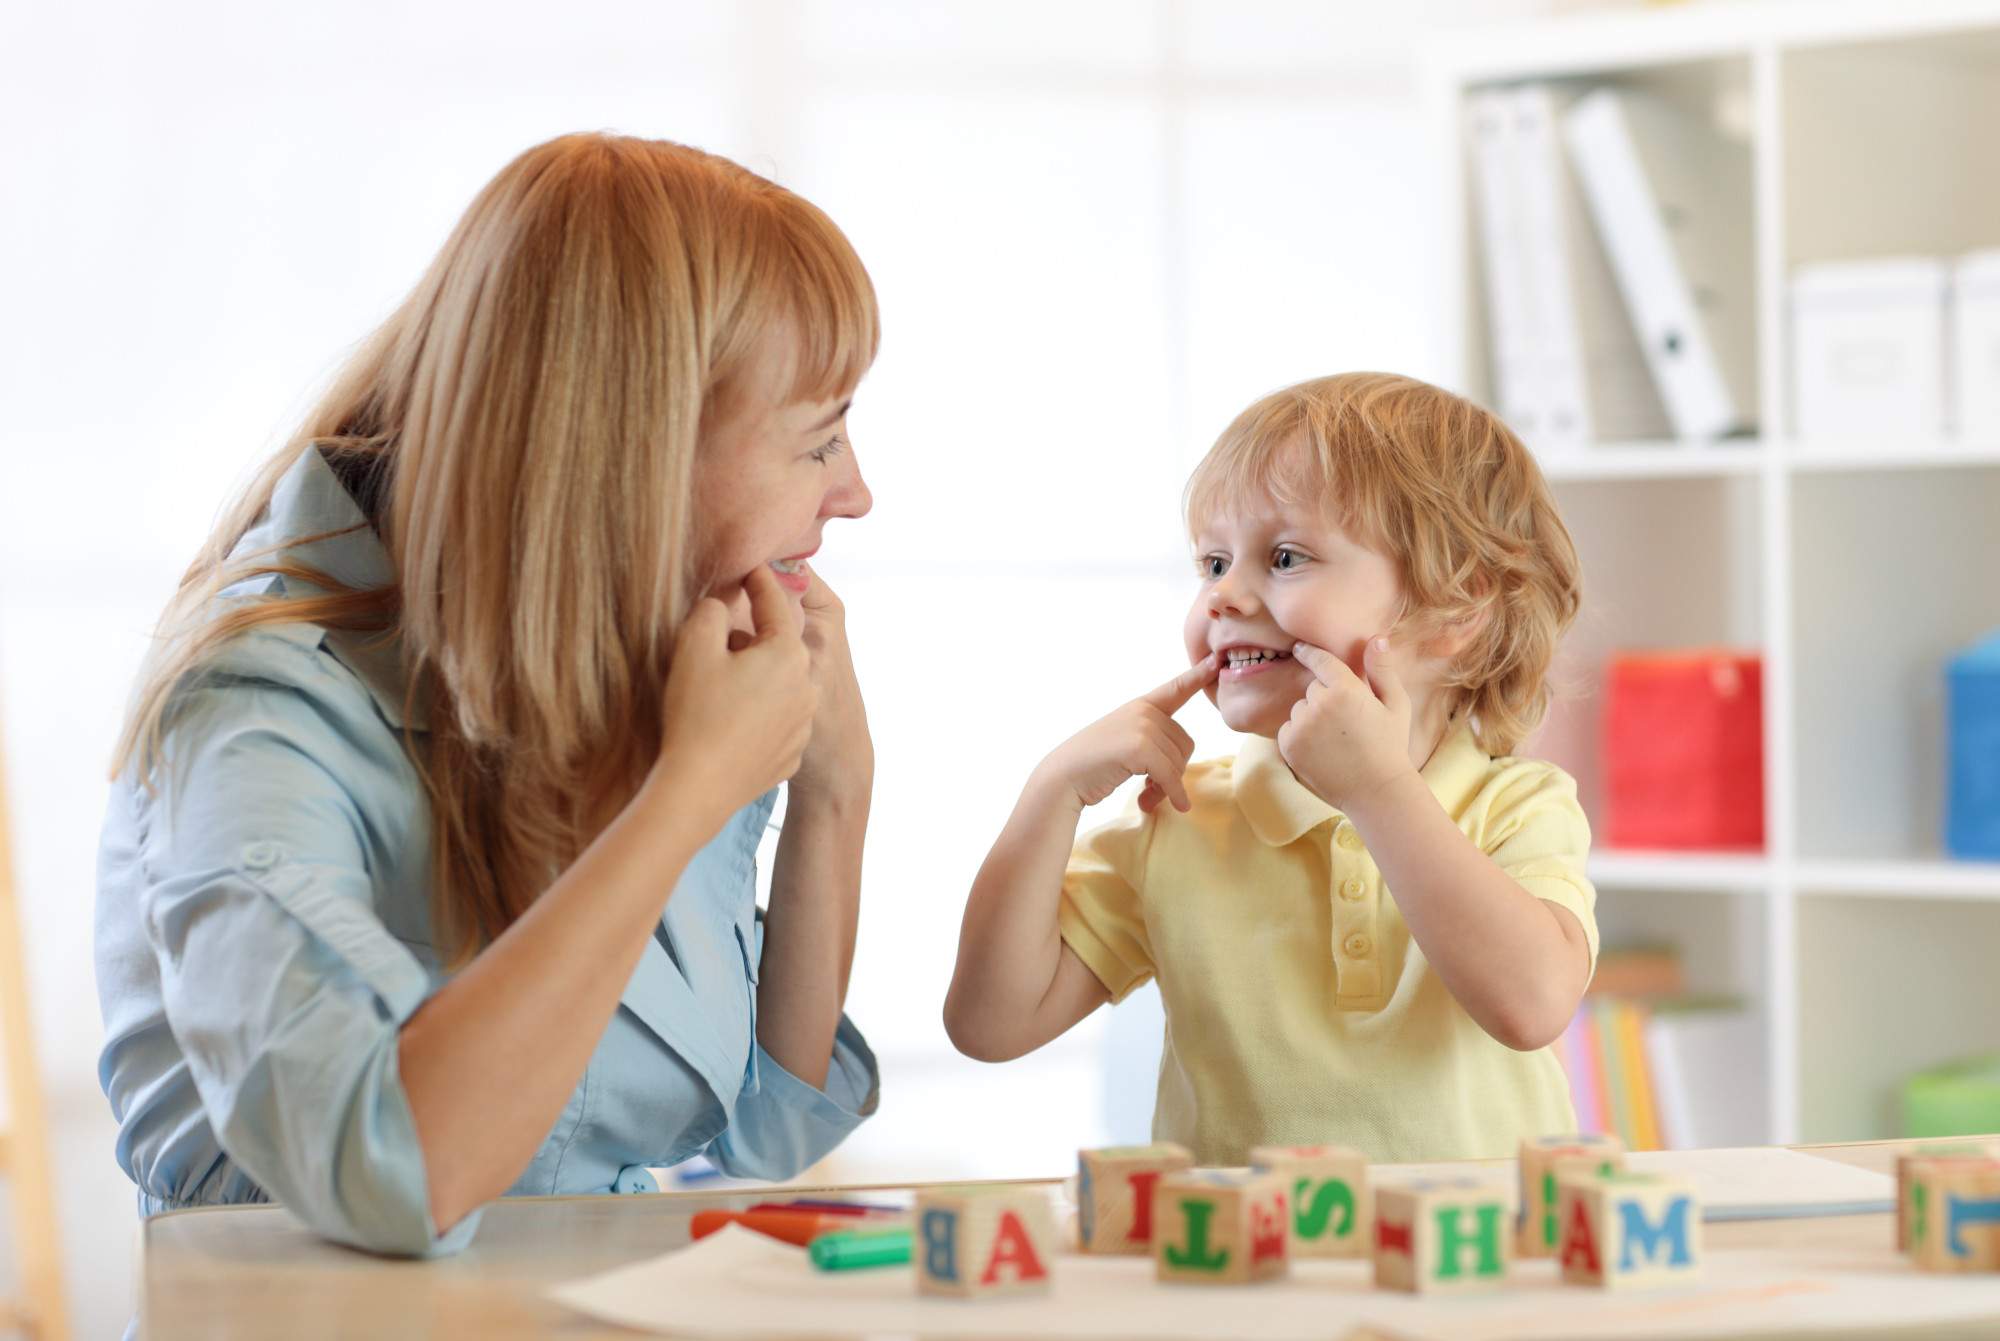 Speech Therapy vs Speech Pathology: What Are the Differences?